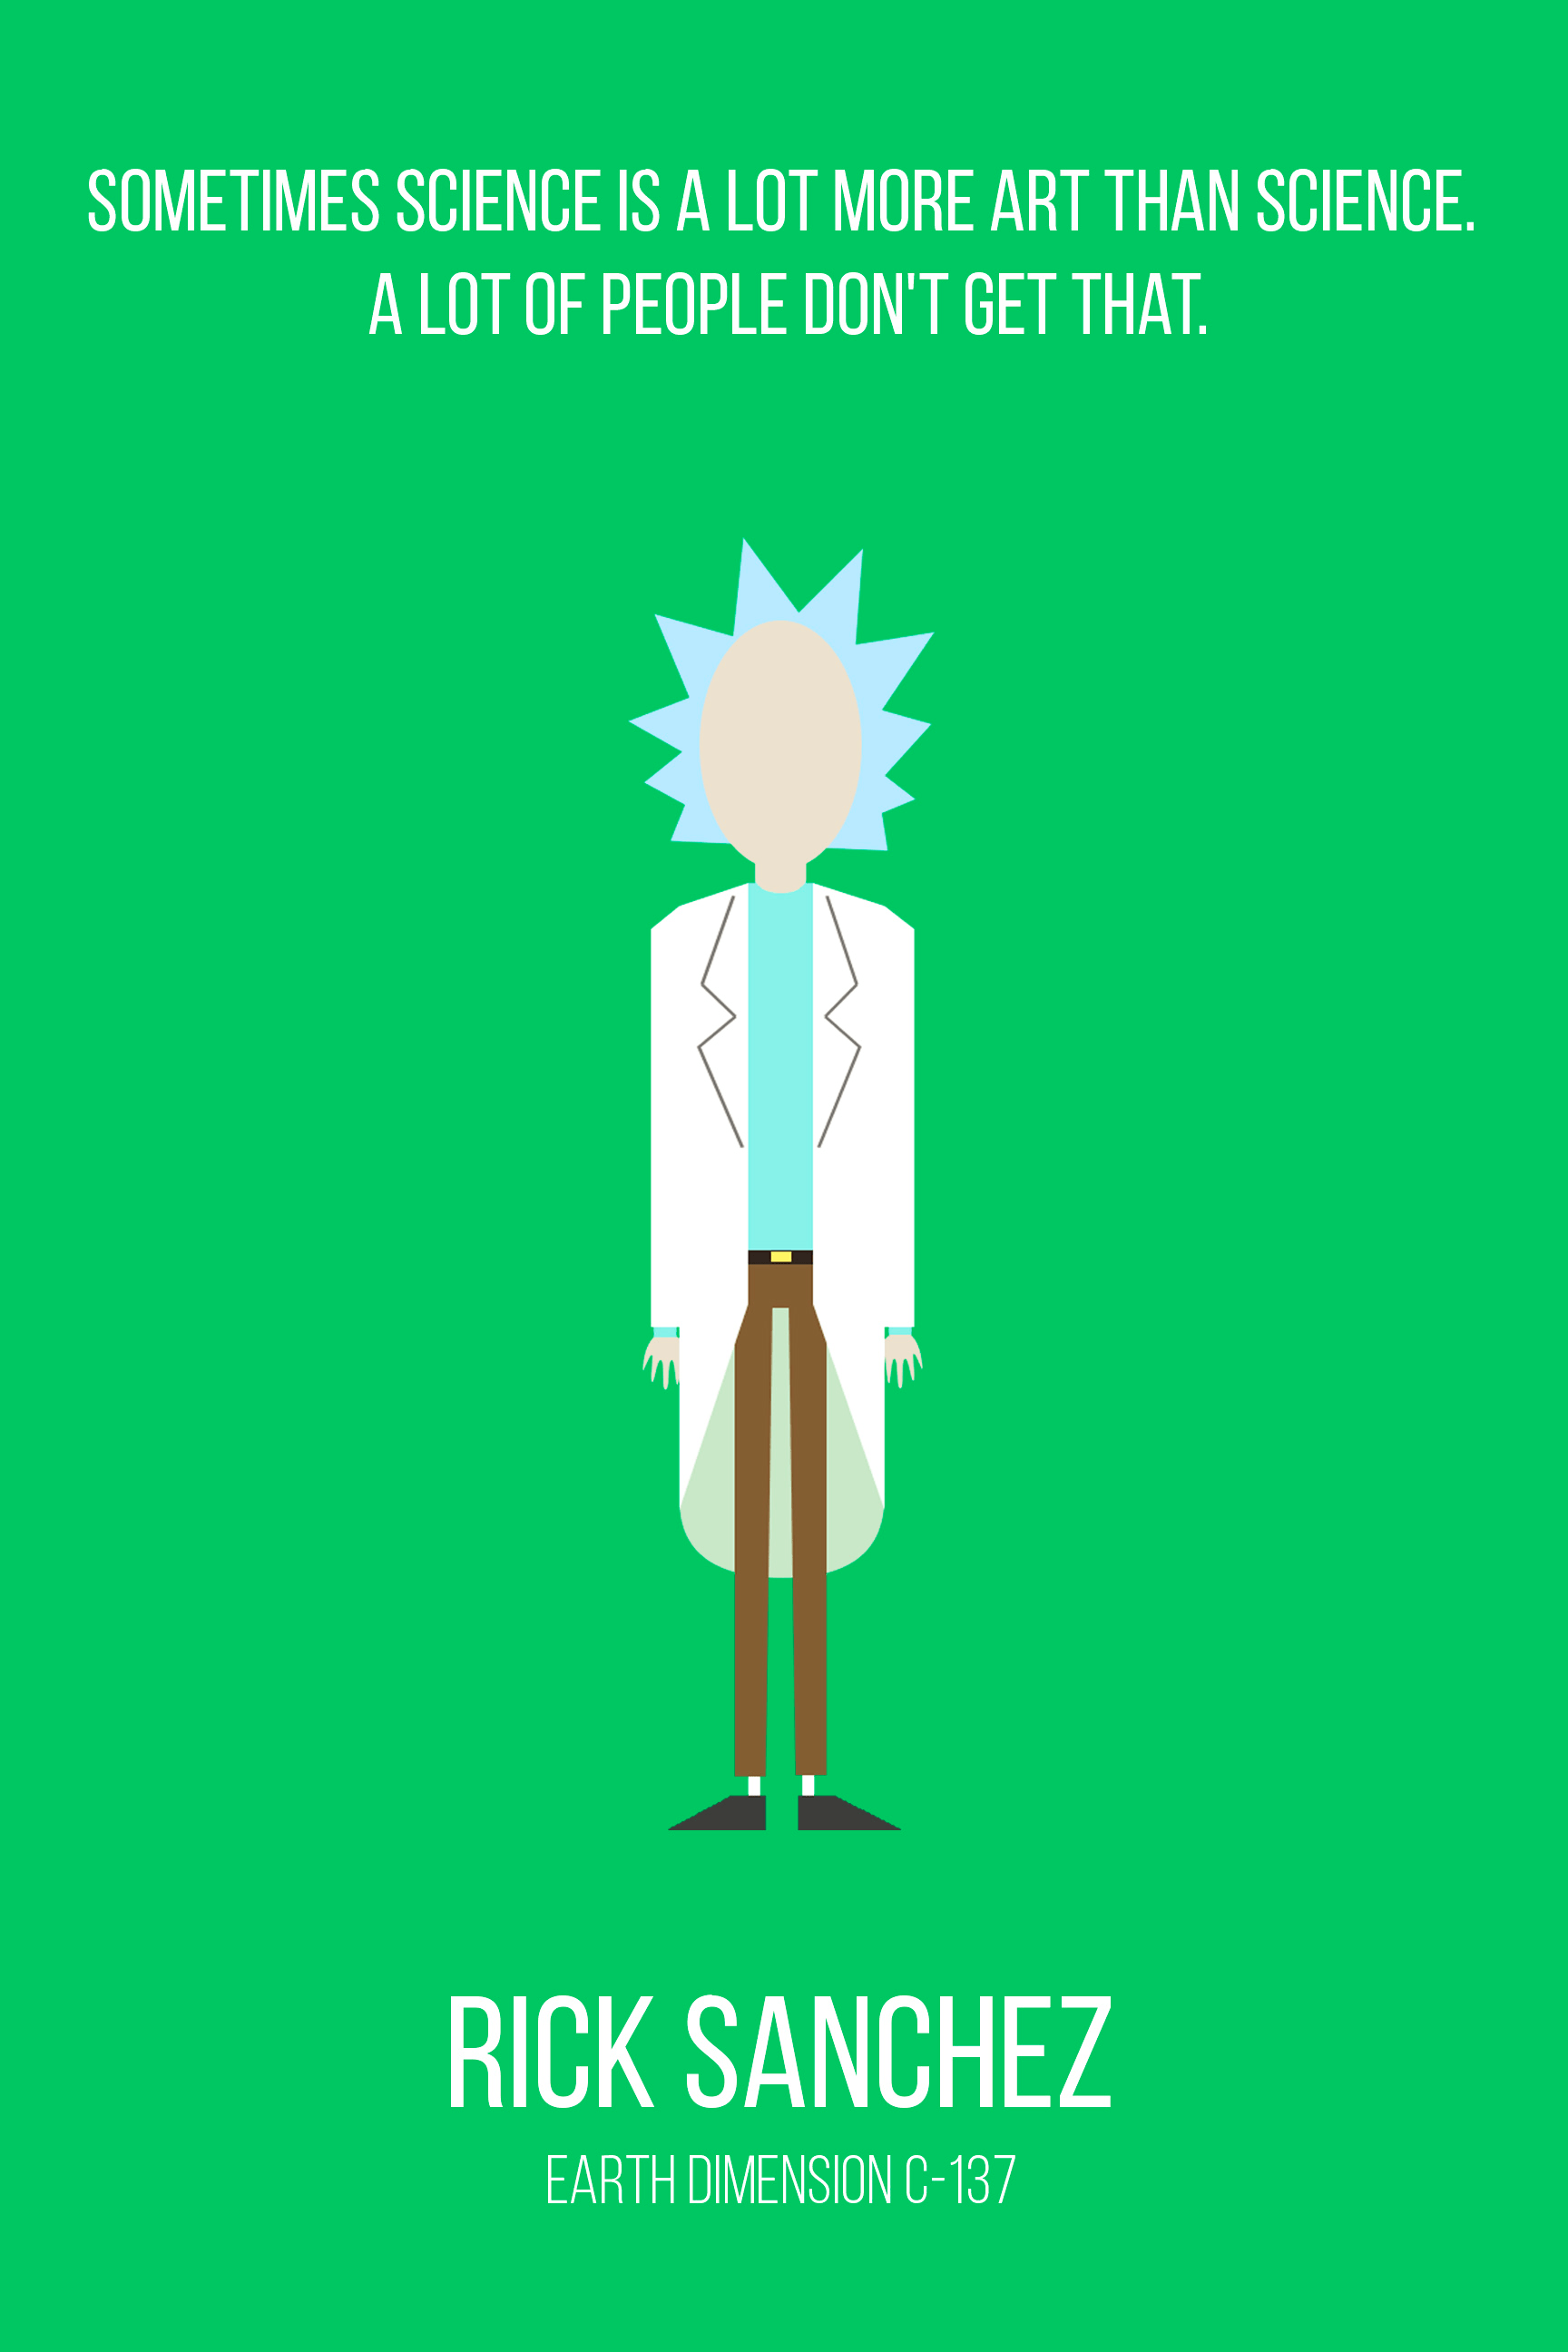 Just some Rick and Morty quotes